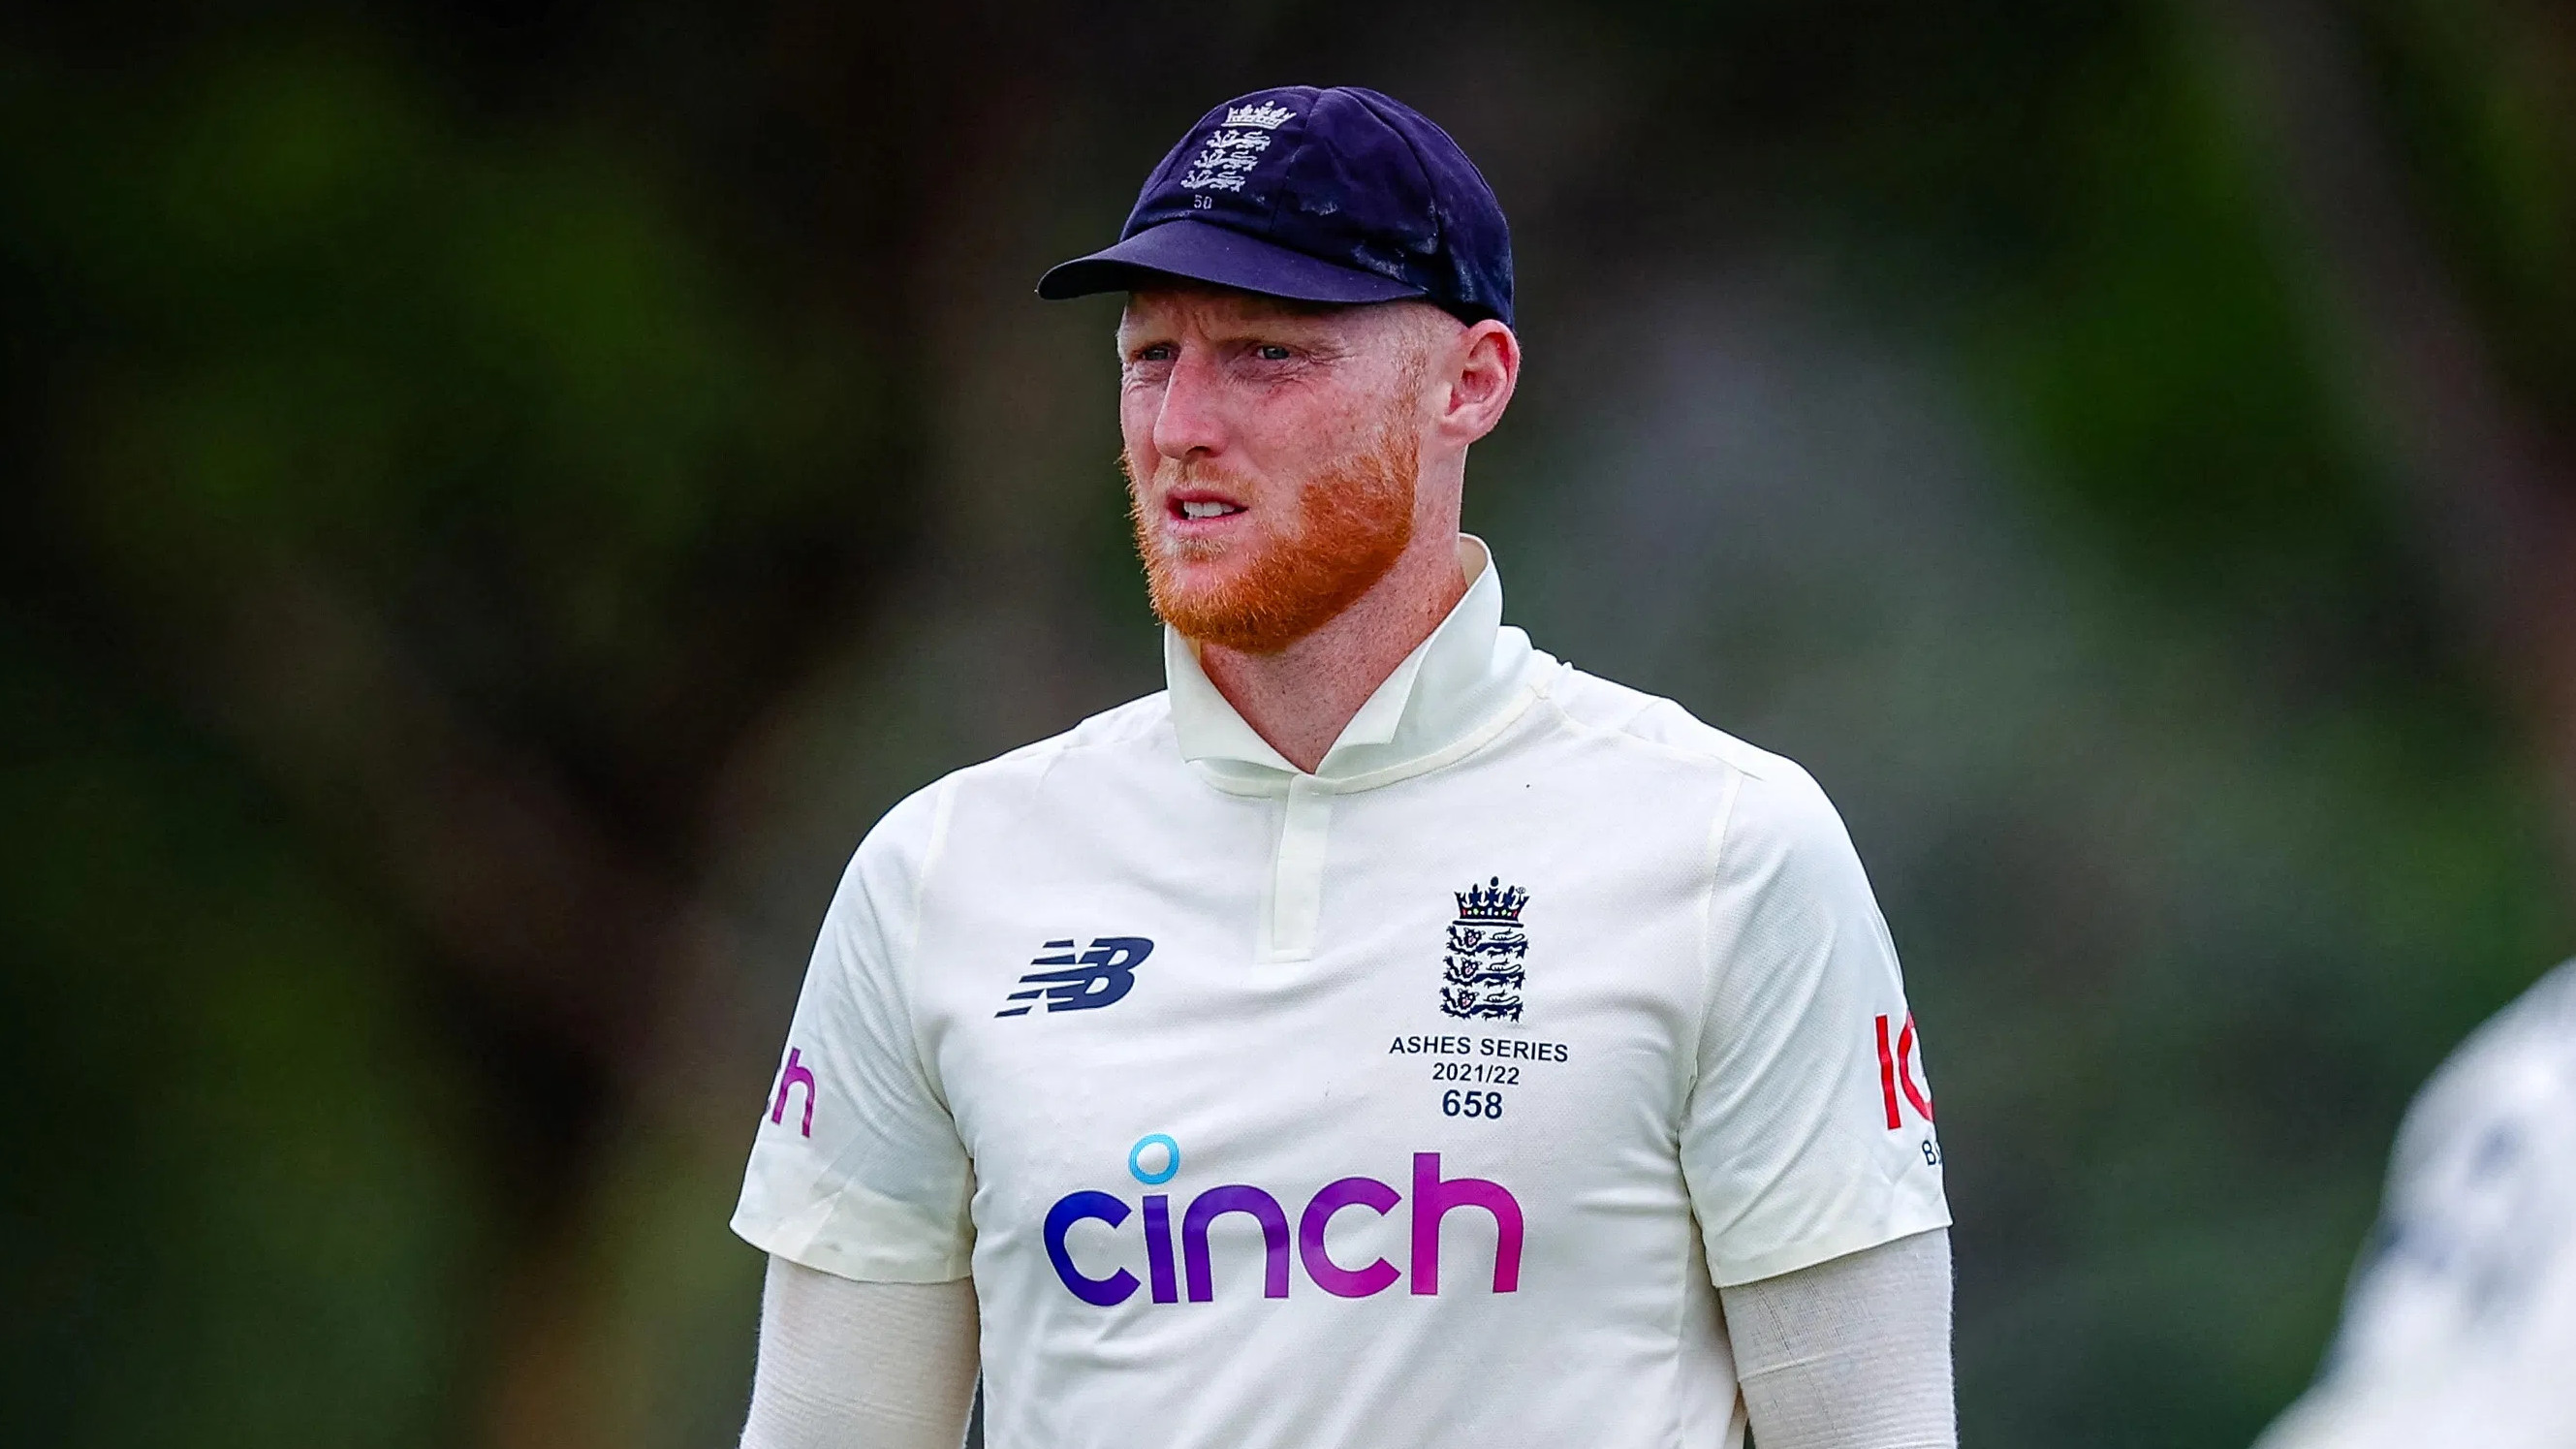 Ashes 2021-22: Ben Stokes hopes to recover from side strain and play in the final Test